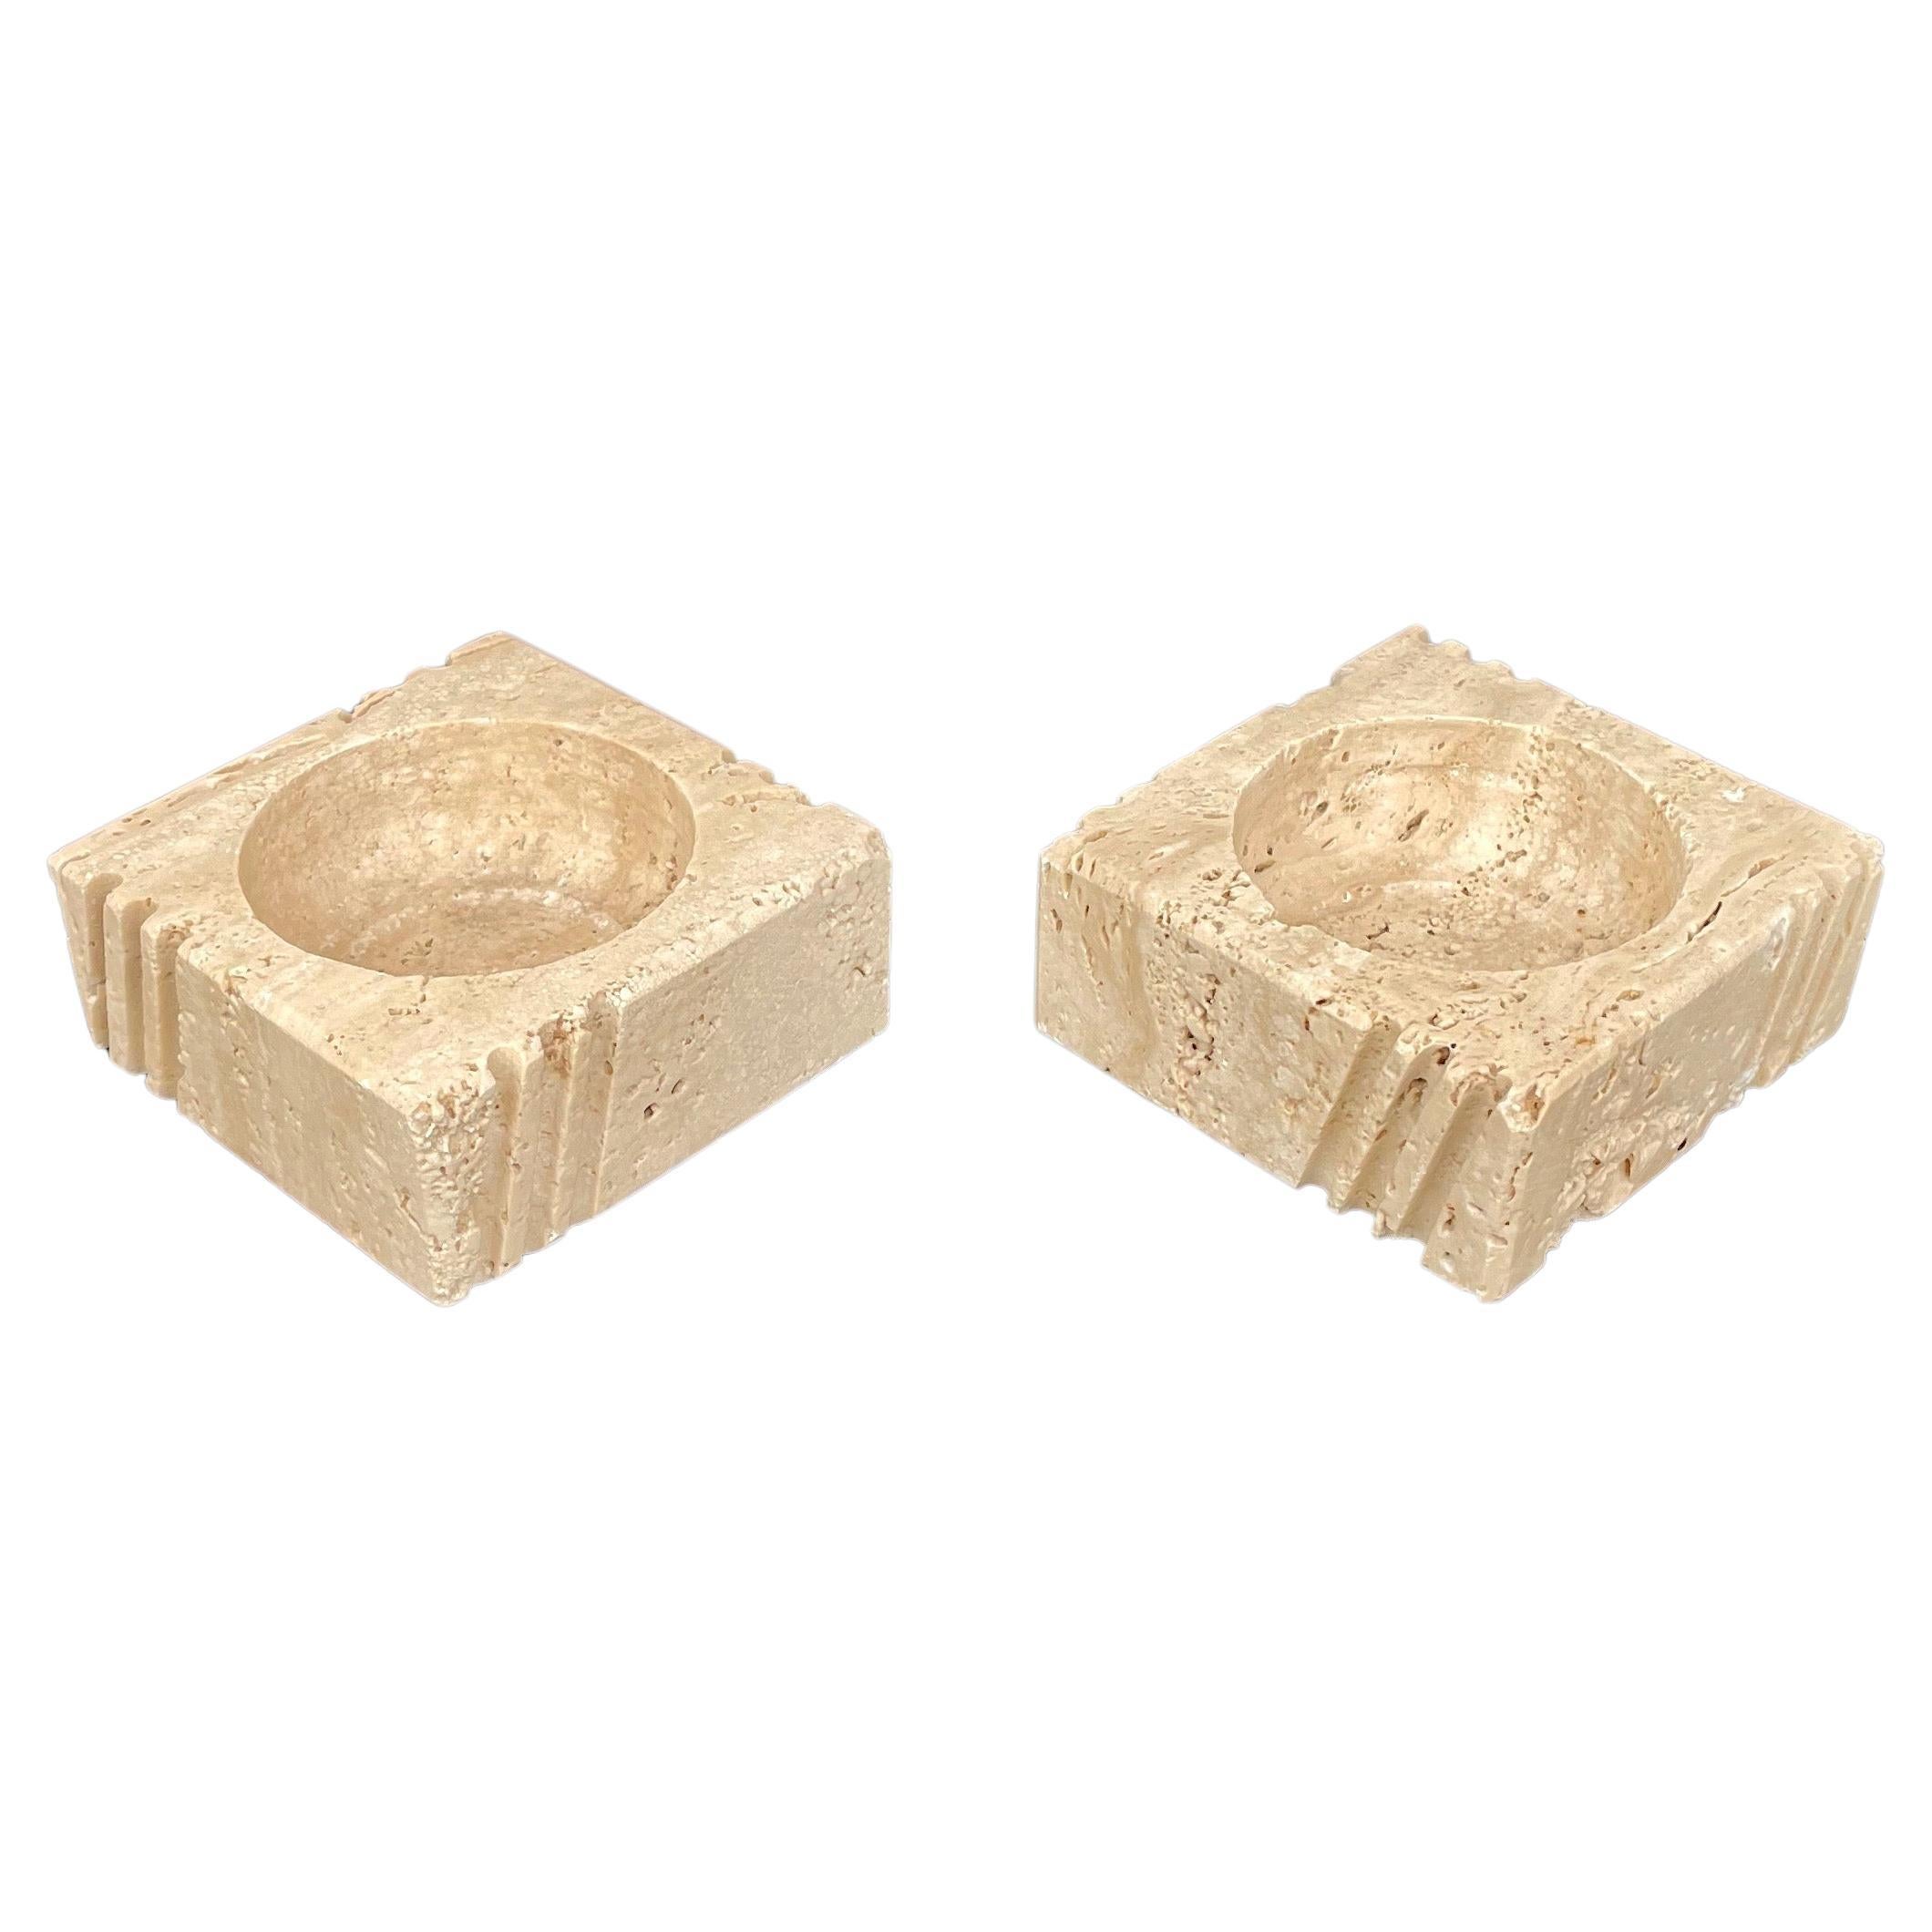 Pair of Candles Holders or Ashtrays Travertine Fratelli Mannelli, Italy, 1970s